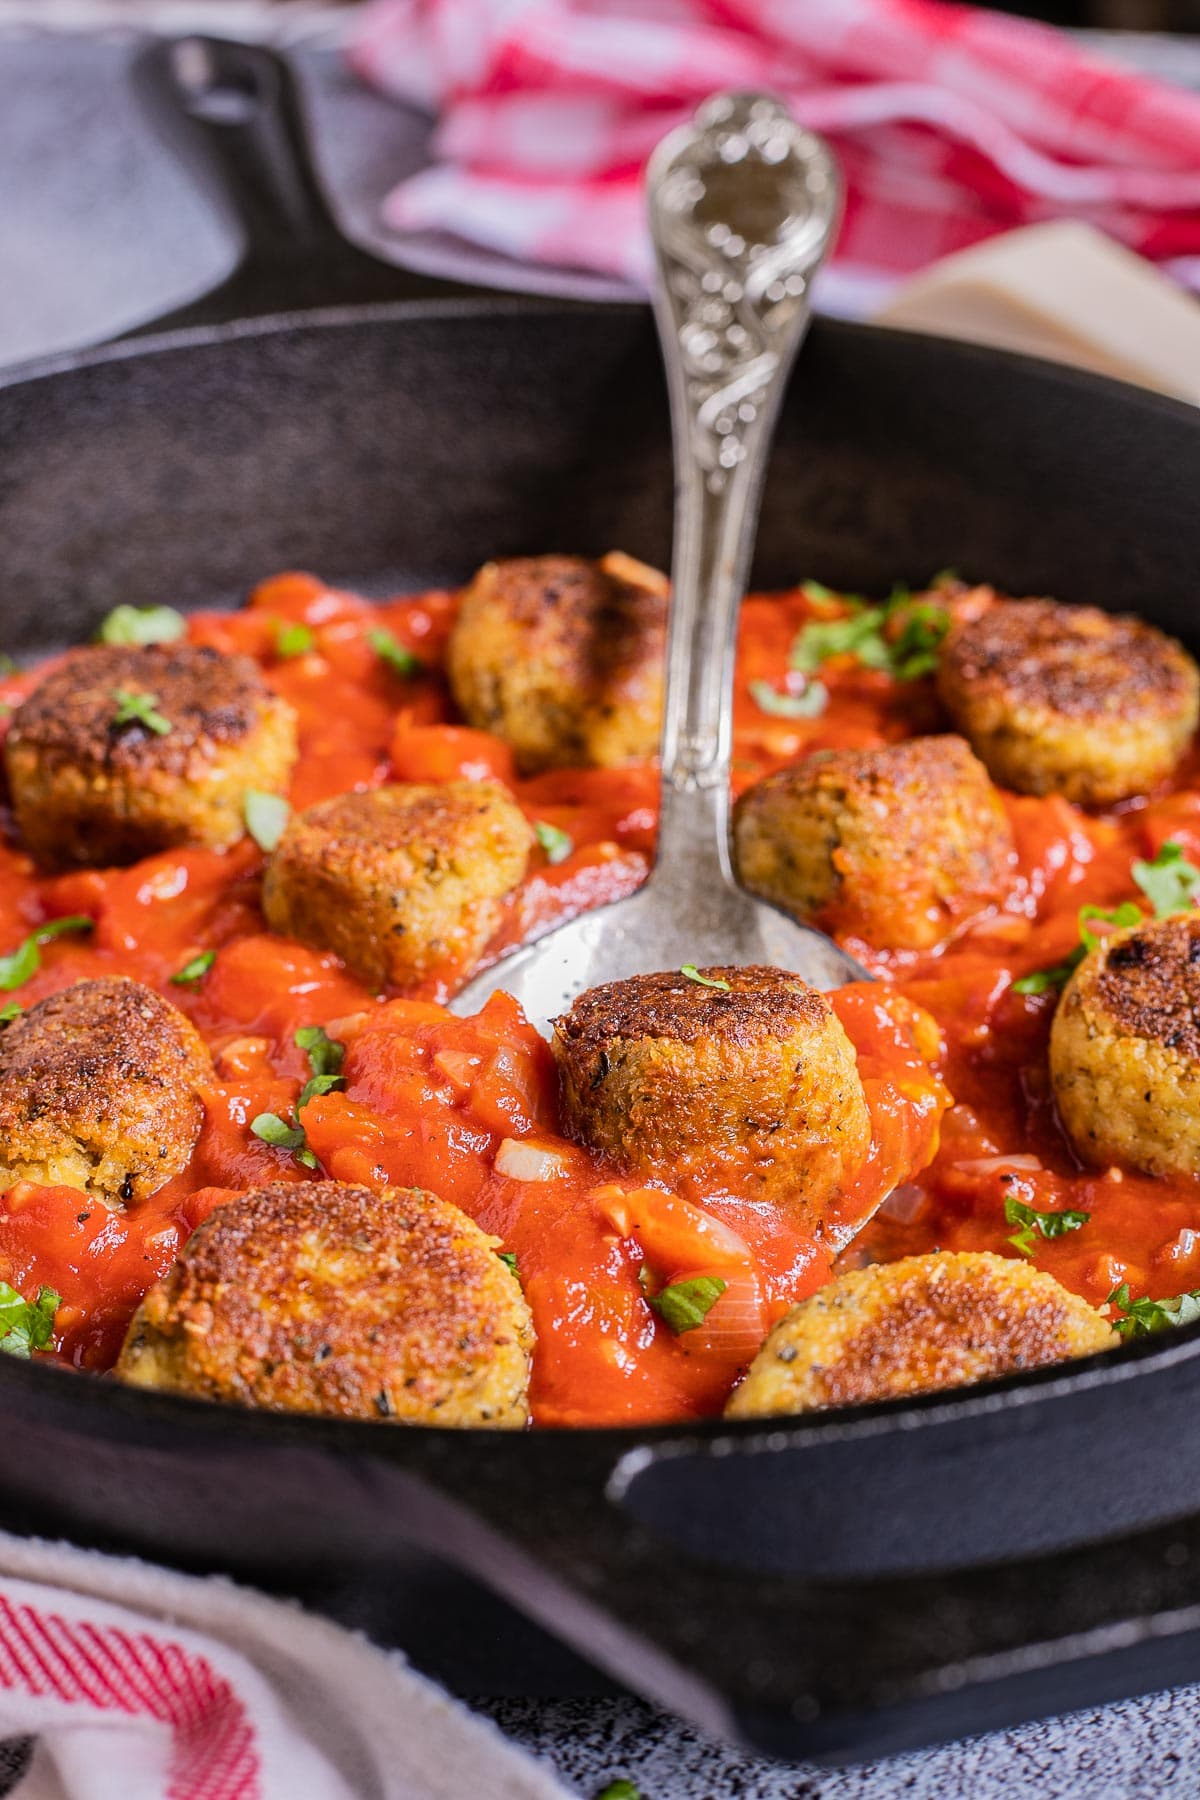 Black cast iron skillet with red marinara sauce and crispy brown tofu meatballs. A large spoon is in the middle.